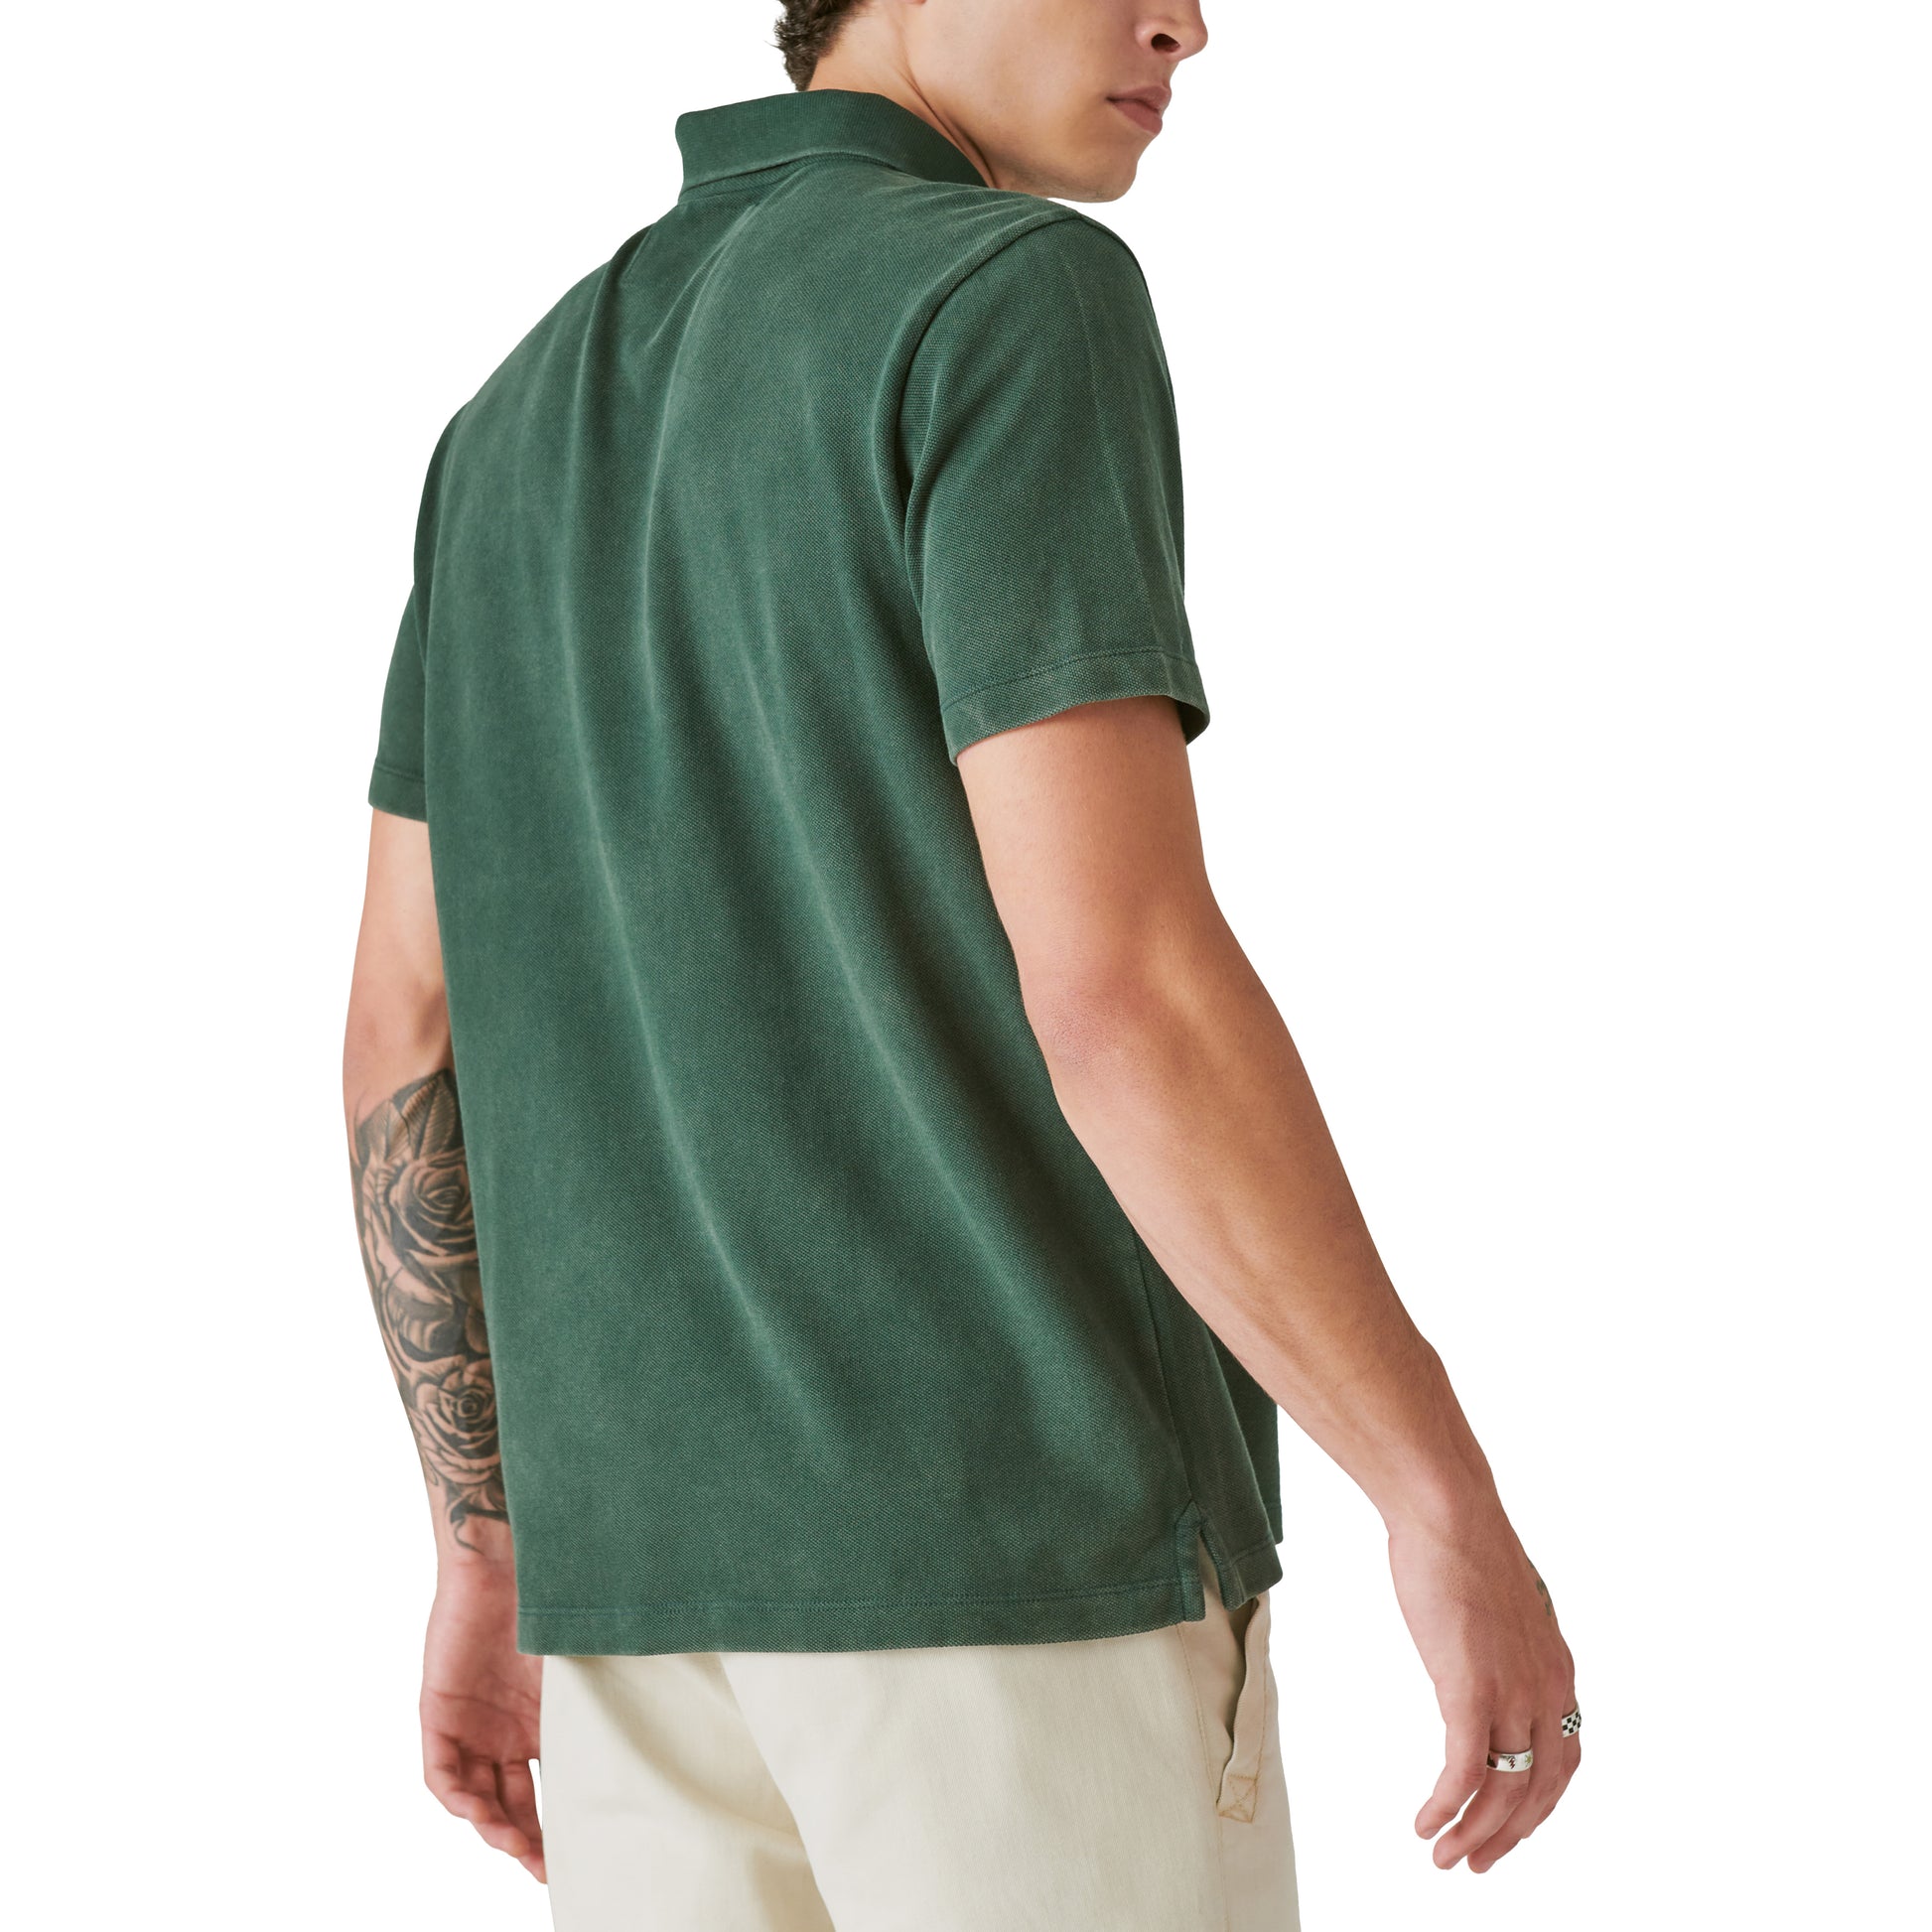 The back view of a man wearing a Guinness Polo - Pine Grove by Guinness Webstore US.